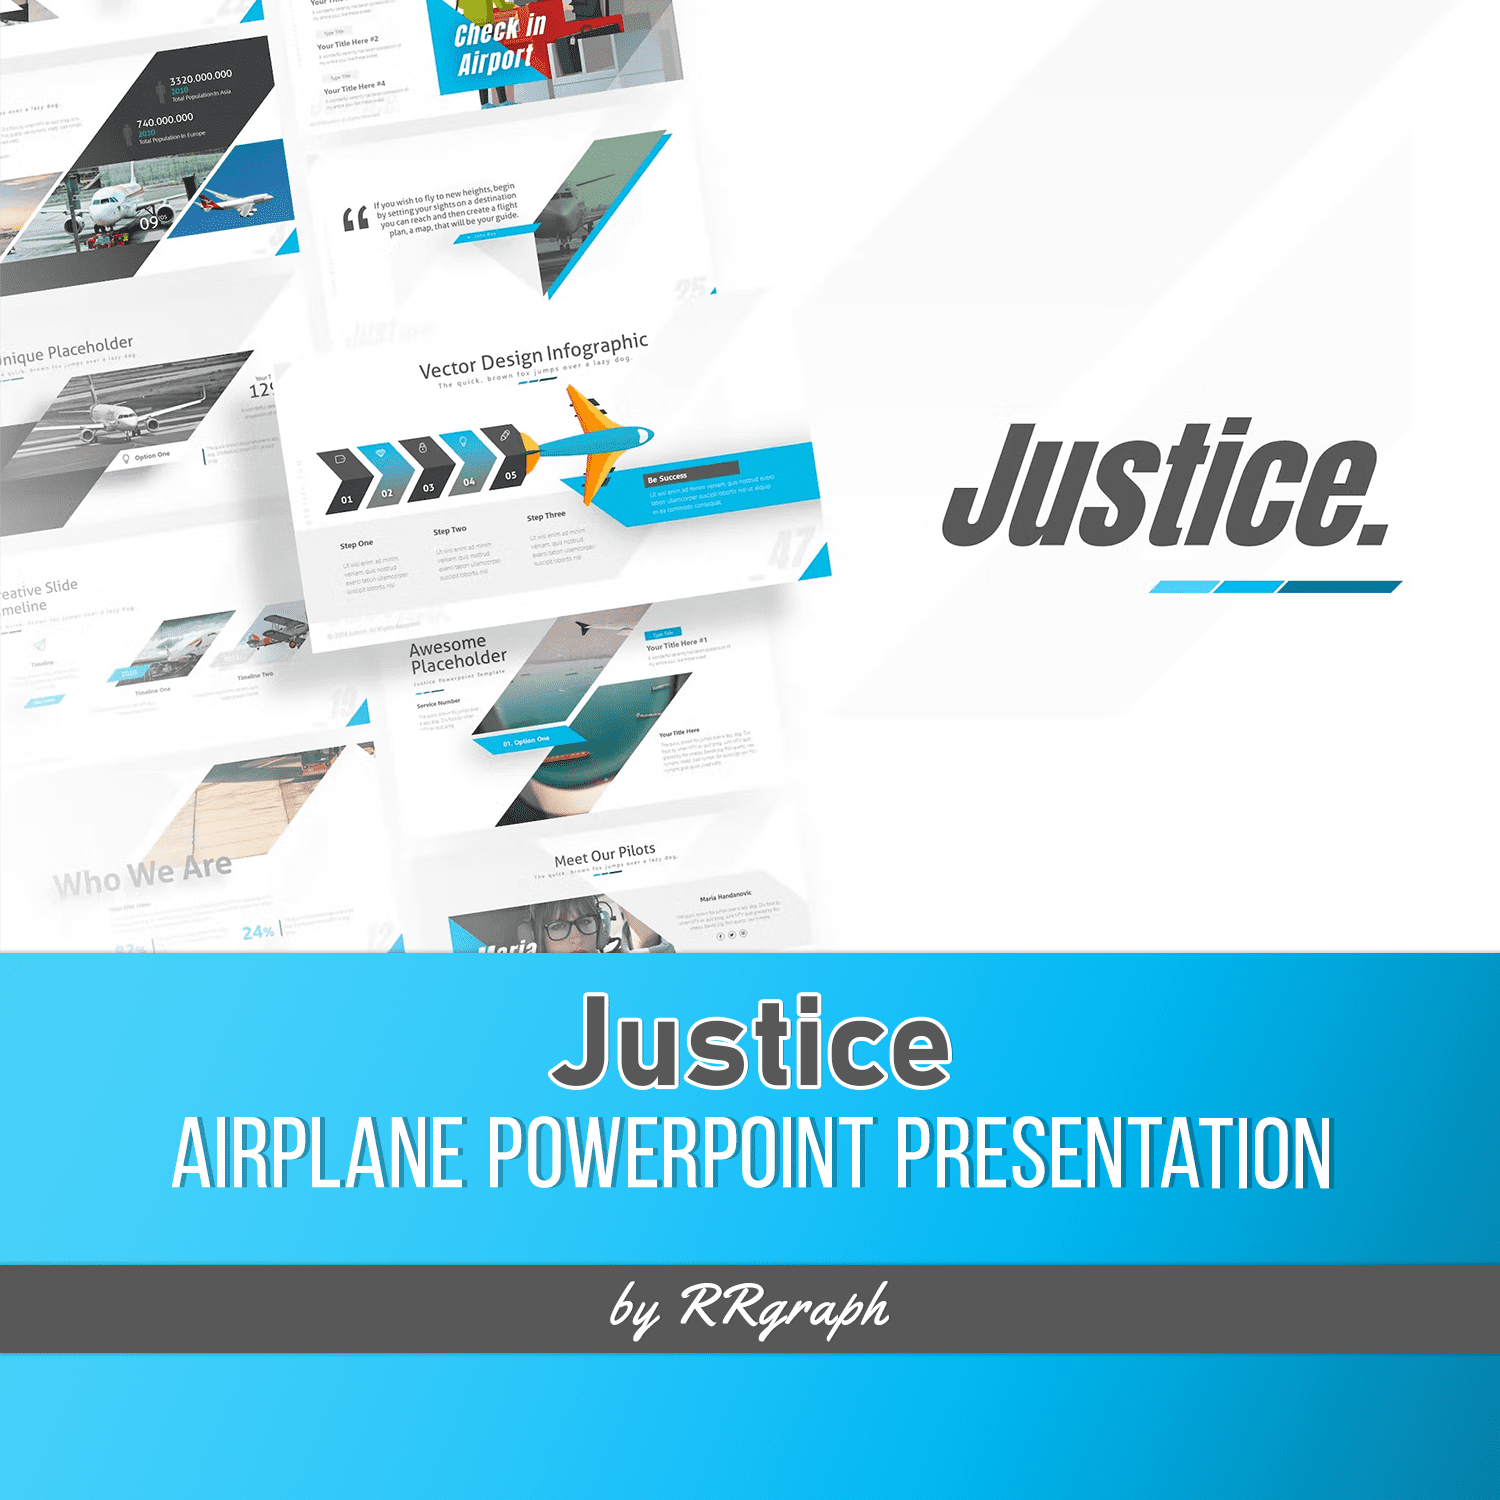 Preview justice airplane powerpoint presentation.